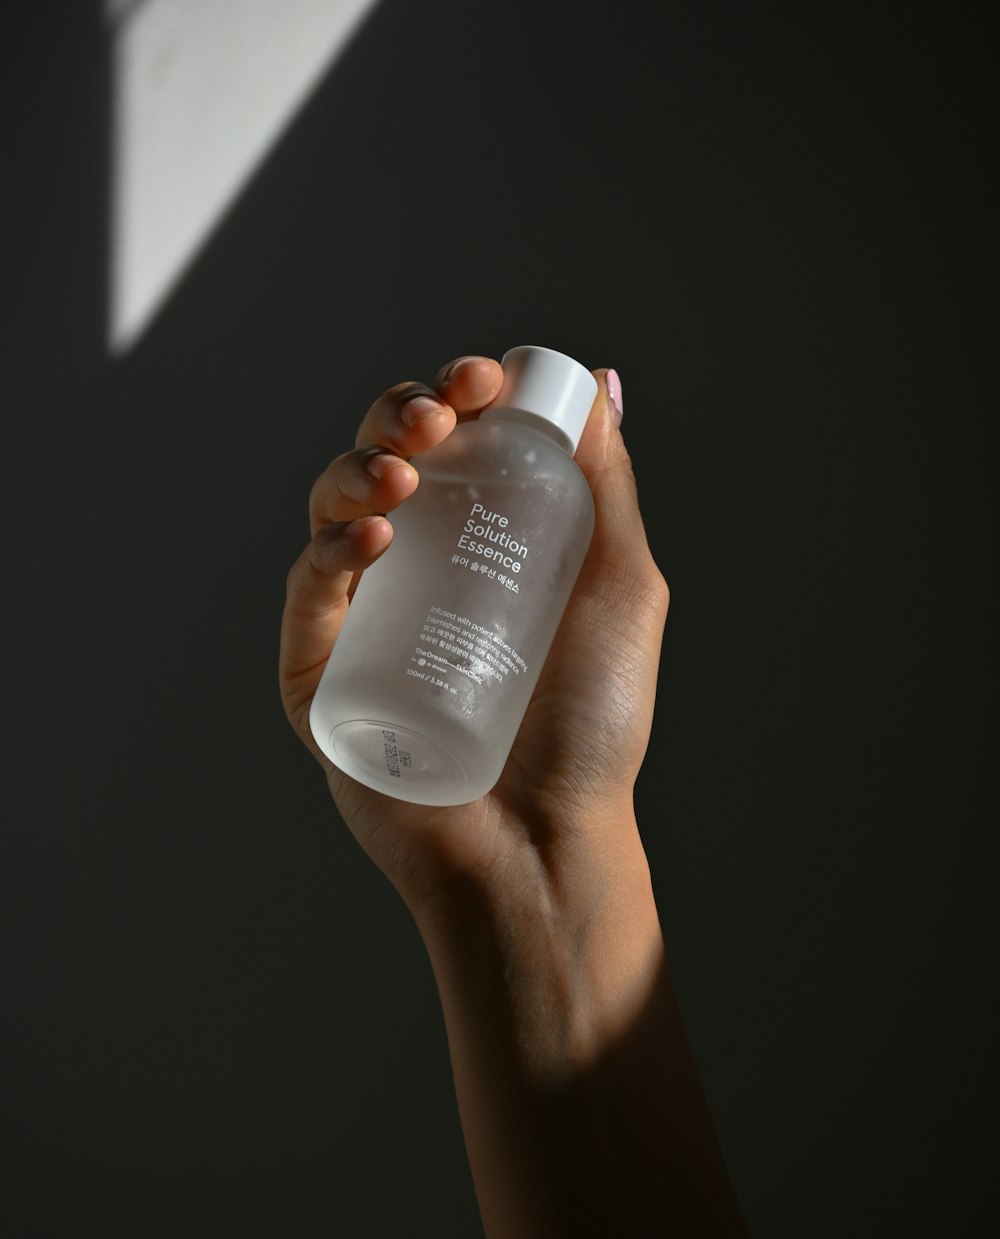  a person holding a bottle